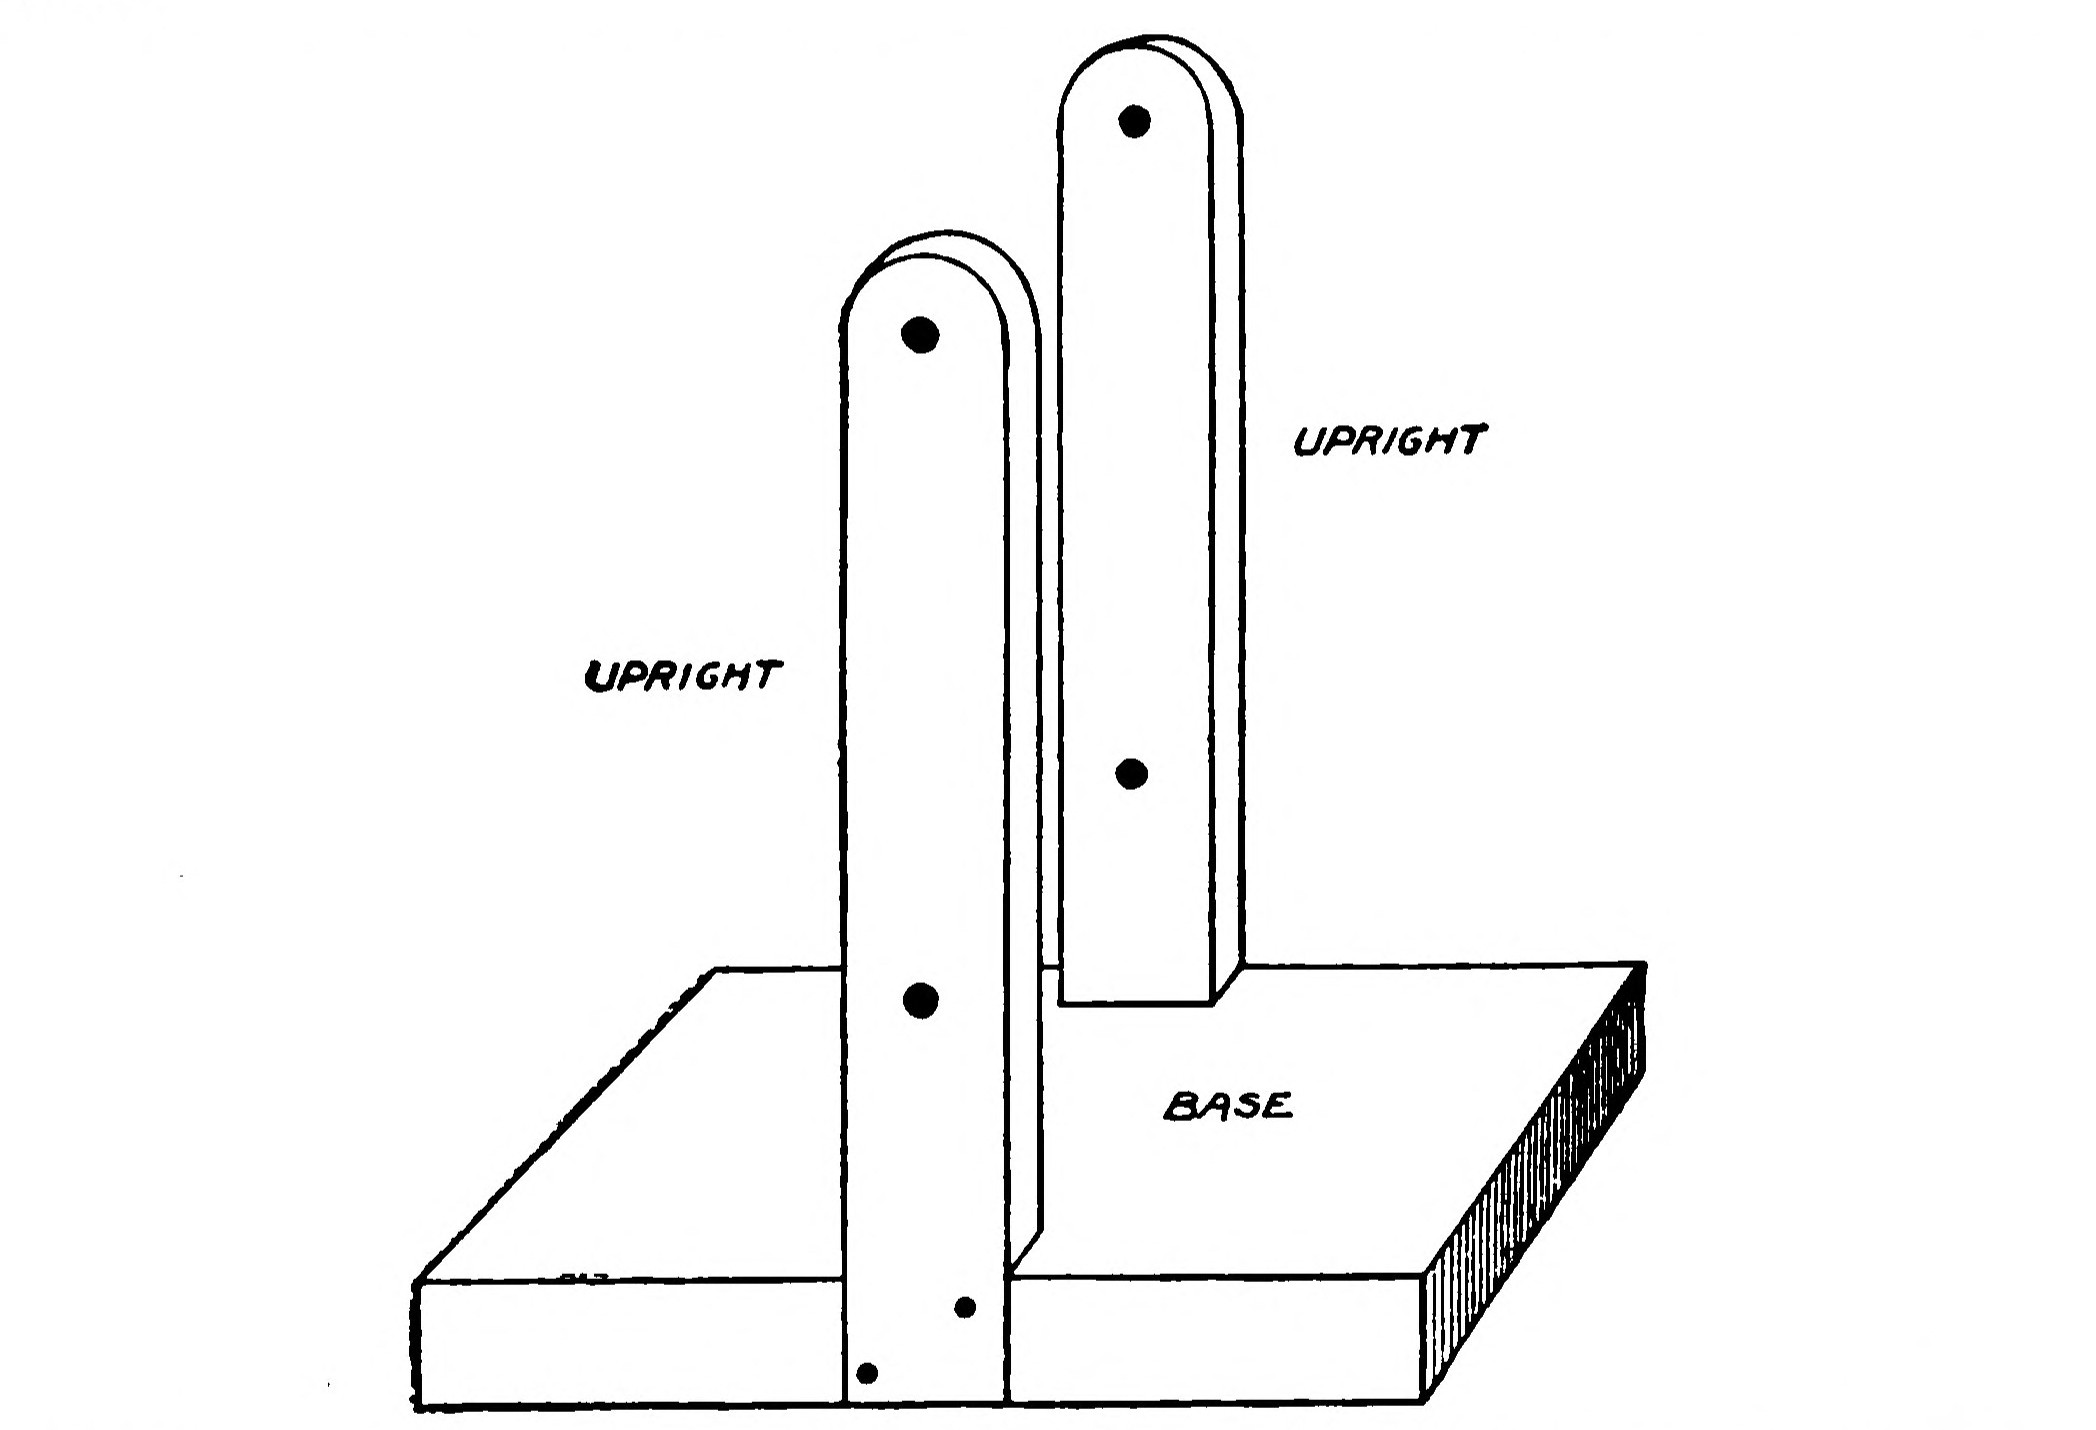 FIG. 7.—Showing the Two Uprights in position on the Base.